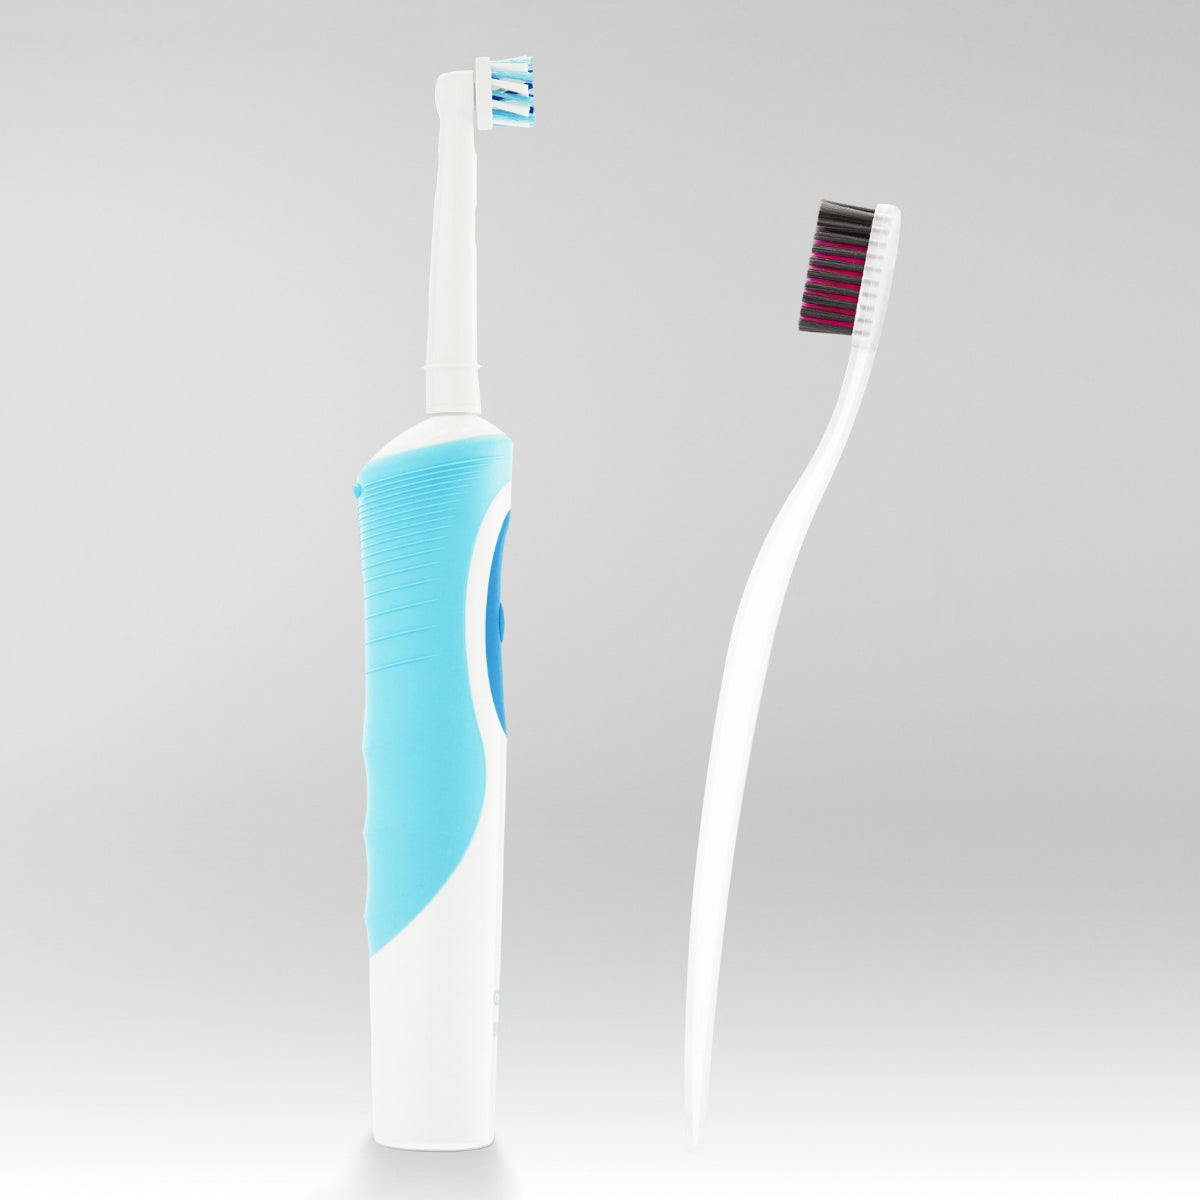 Surprising Facts About Electric Toothbrushes